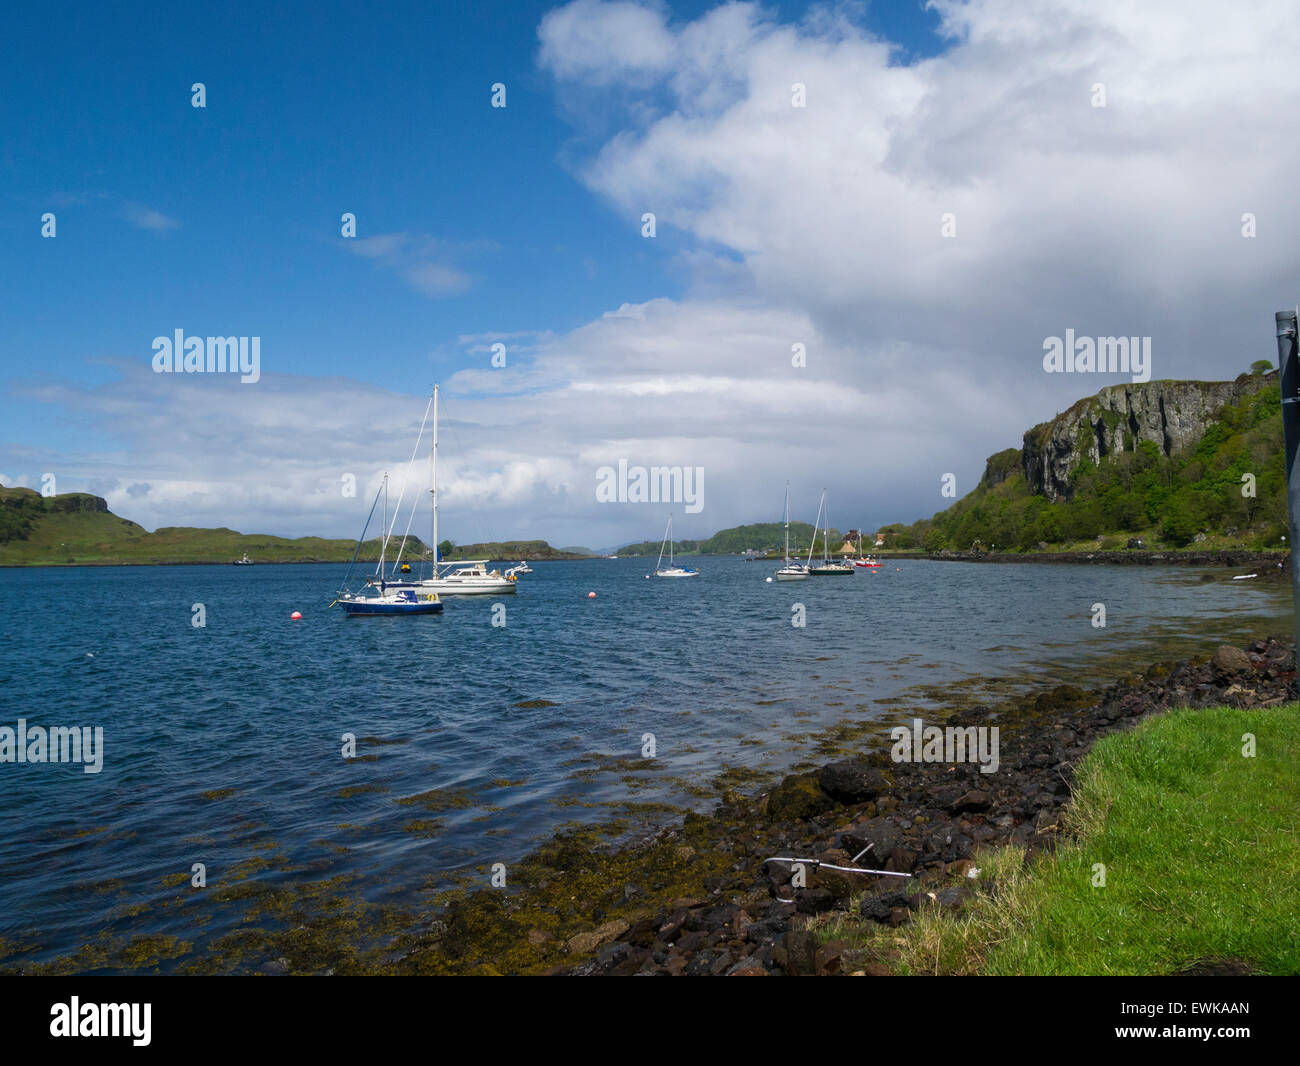 Yachts moored in calm Sound of Kerrera popular tourist resort town Oban Argyll and Bute Scotland on lovely May day weather blue sky Stock Photo